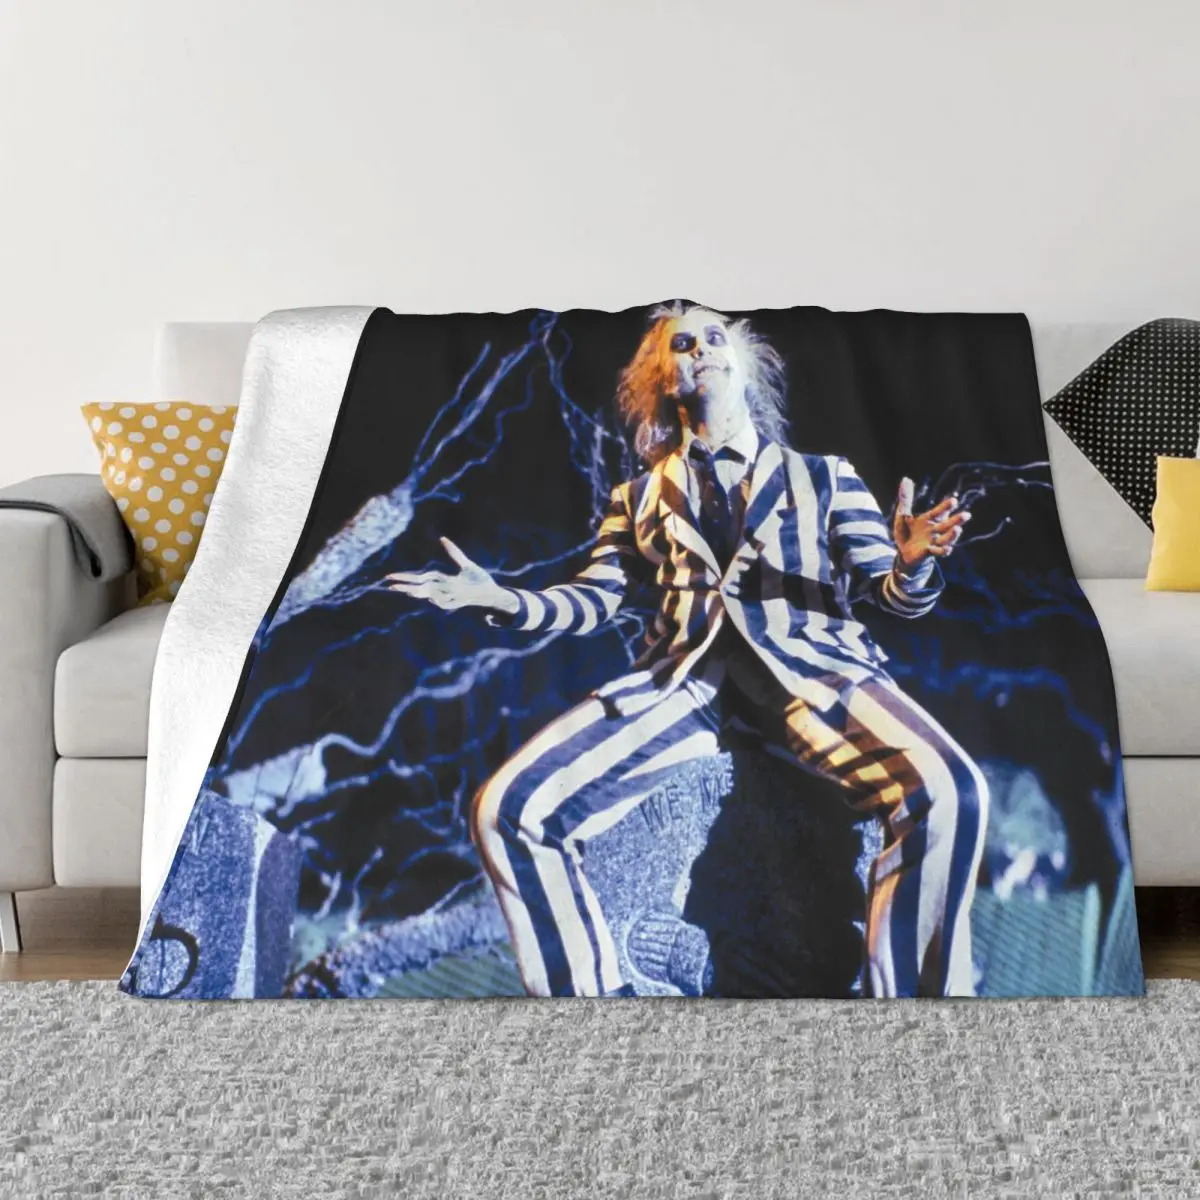 

Beetlejuice Horror Movie Blanket Coral Fleece Spring Autumn Cartoon Warm Throw Blankets for Bedding Office Plush Thin Quilt